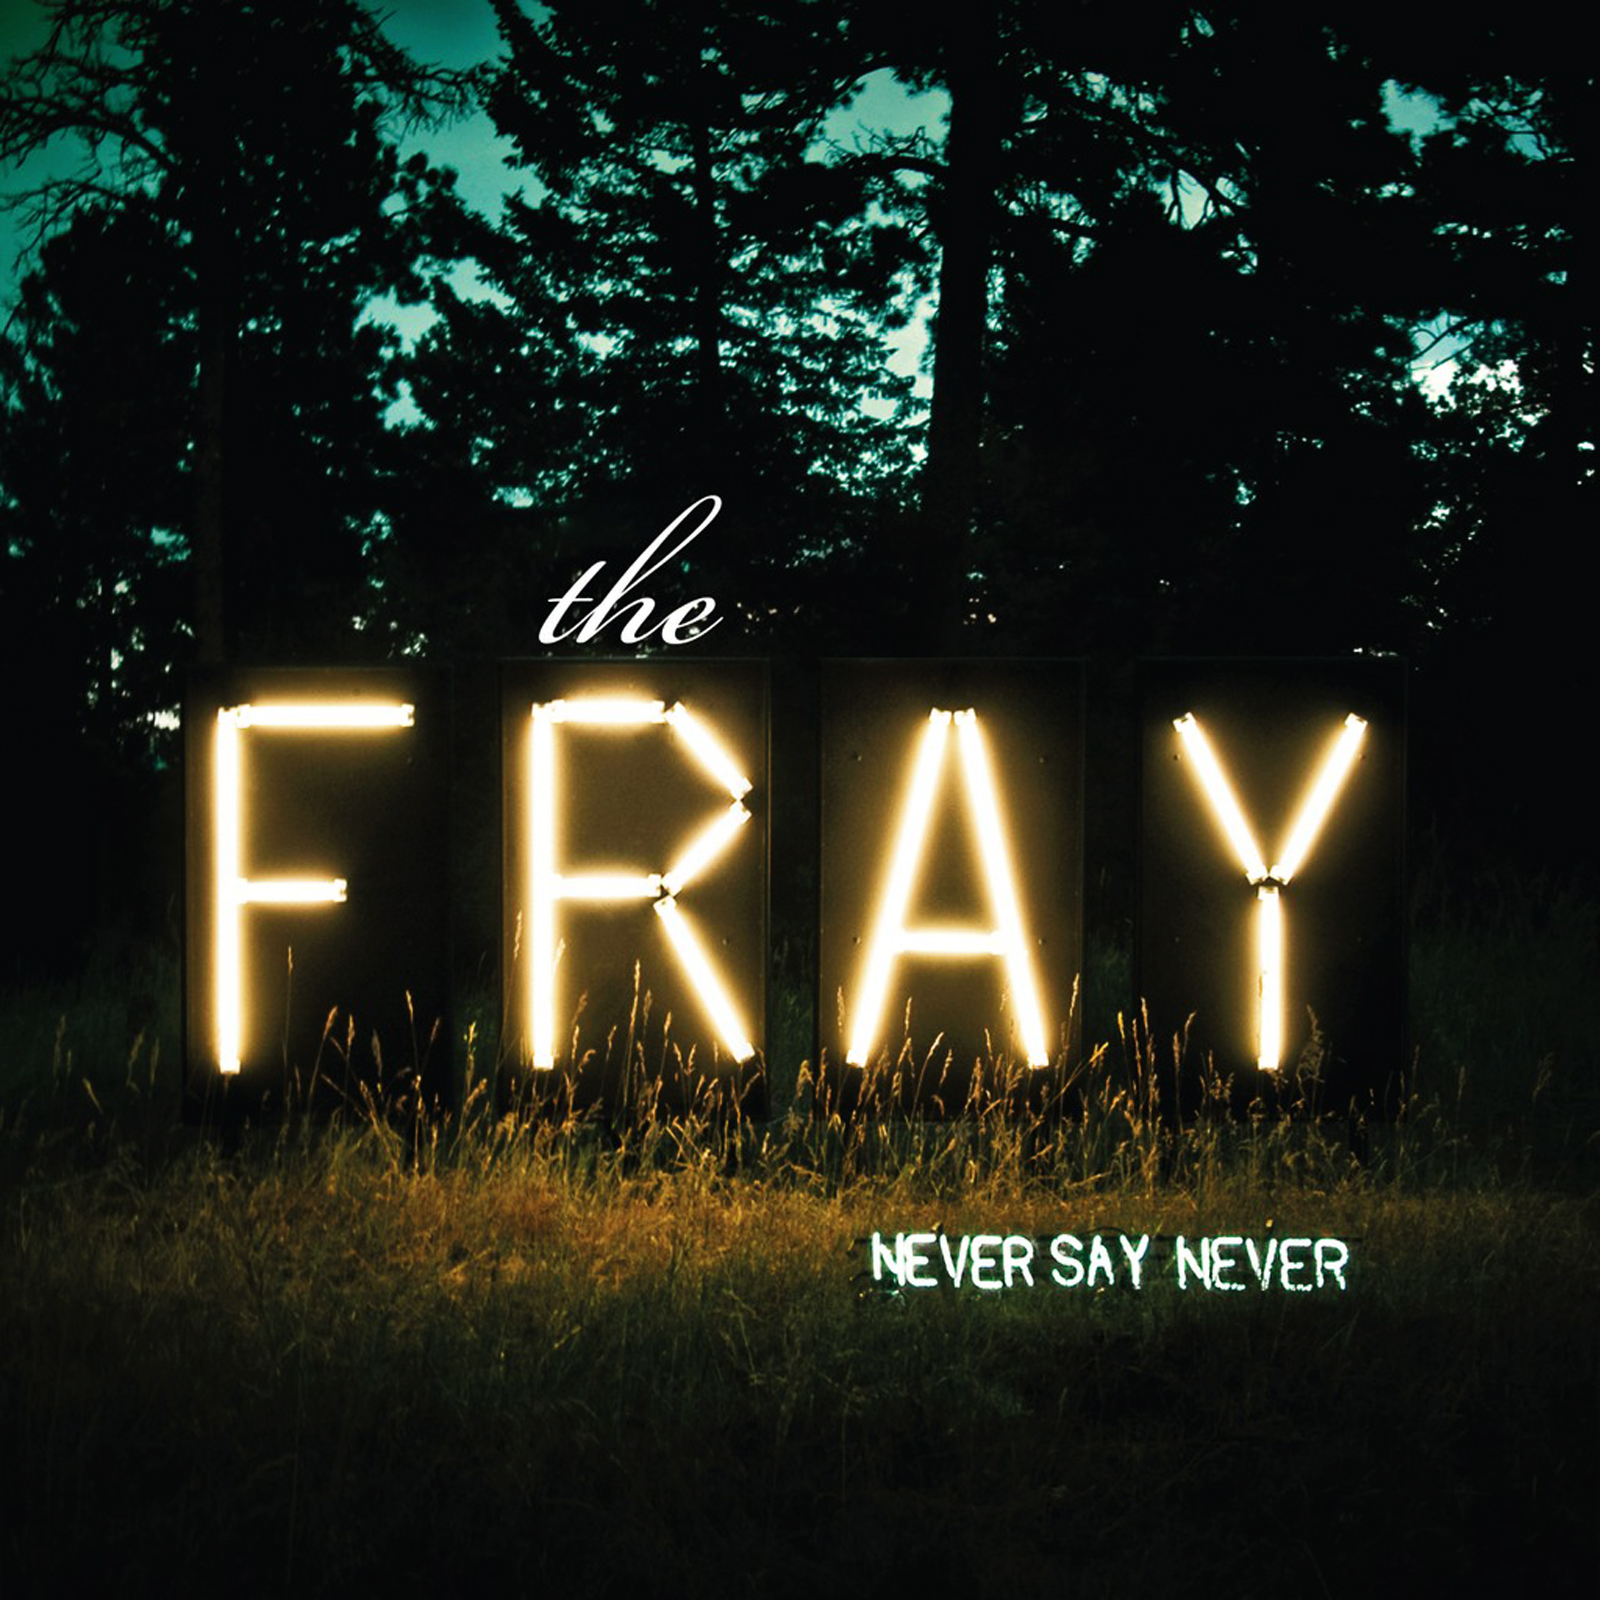 Central Wallpaper: The Fray Rock Band HD Wallpapers and Cover